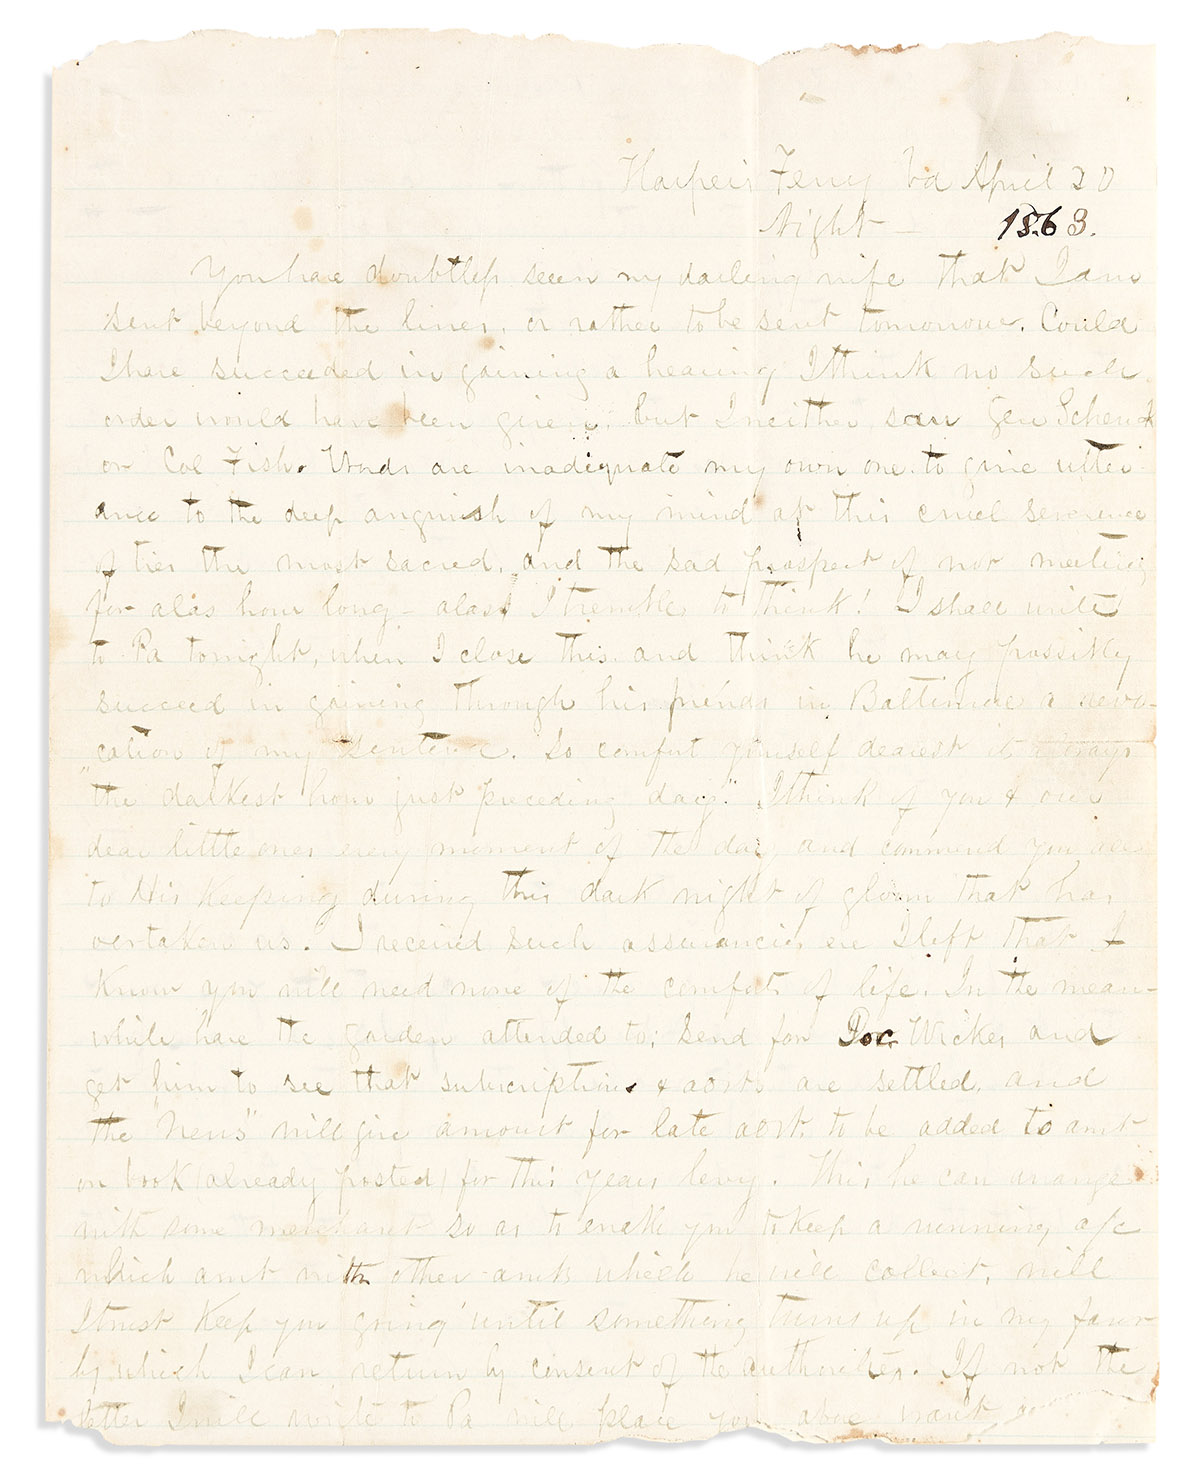 (CIVIL WAR--MARYLAND.) J. Leeds Barroll. Letter by a Confederate-leaning newspaperman being exiled to Virginia, with other letters.